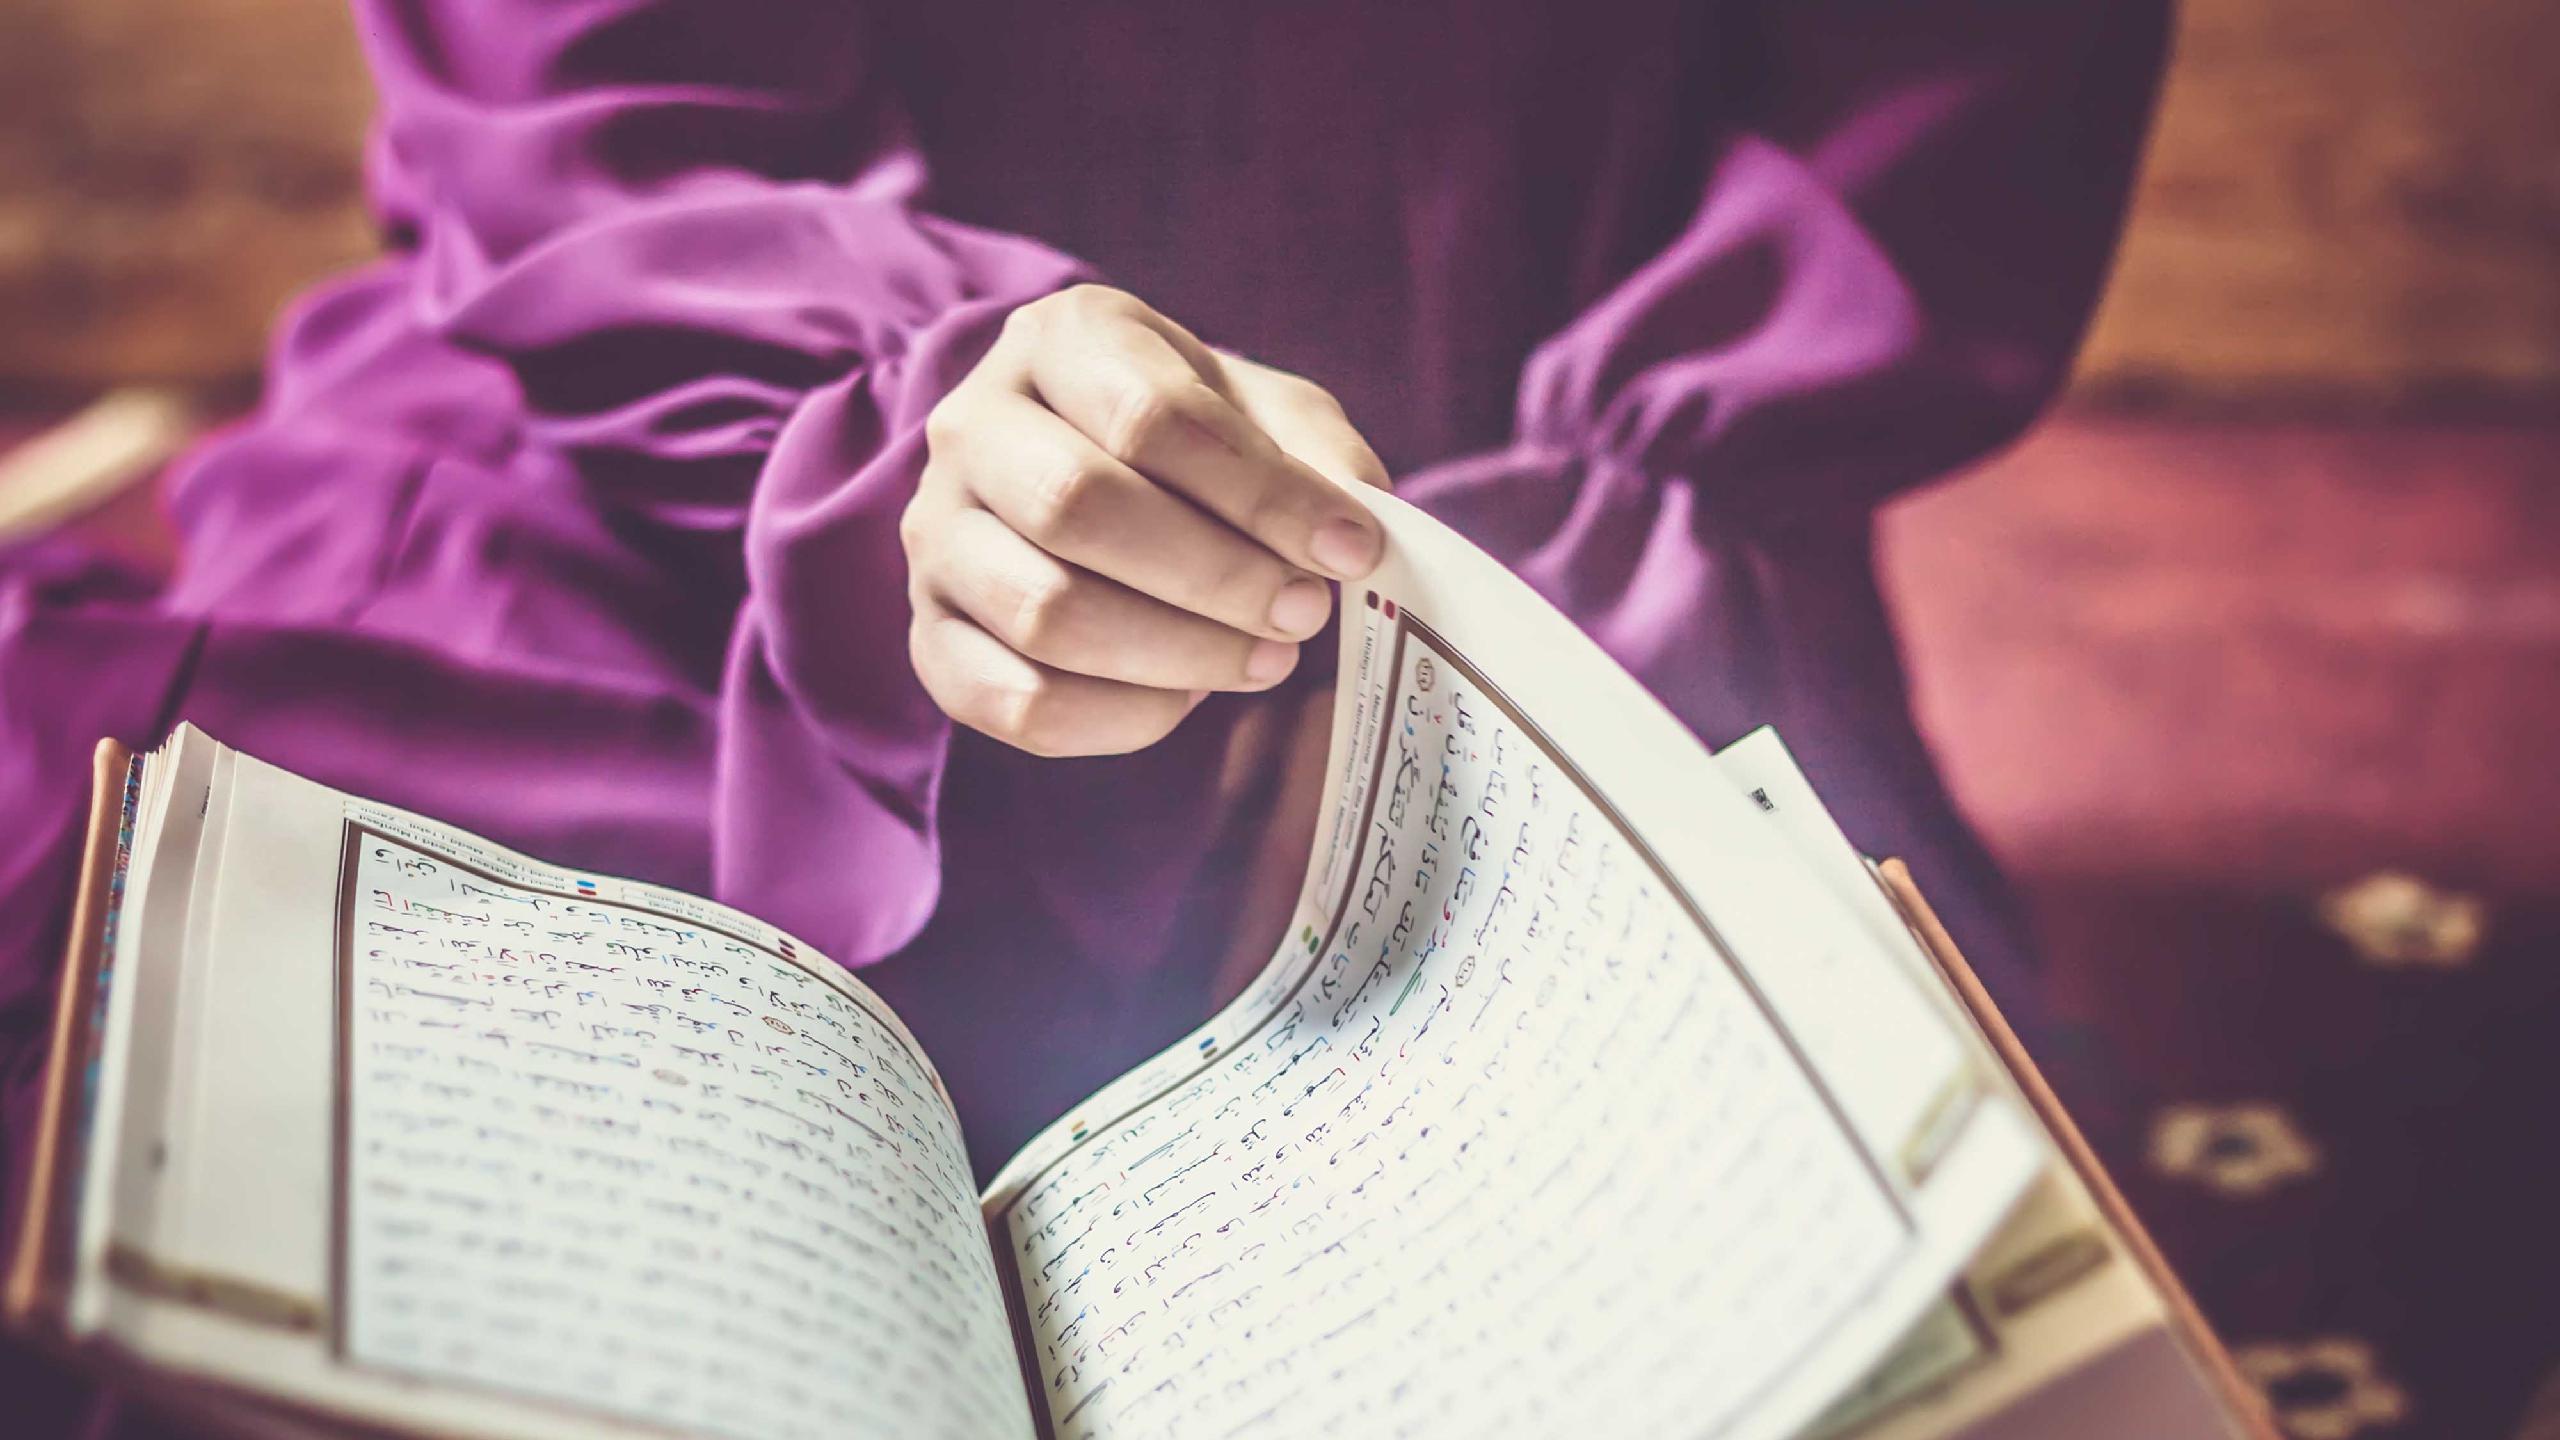 Tips and tricks to learn QURAN faster